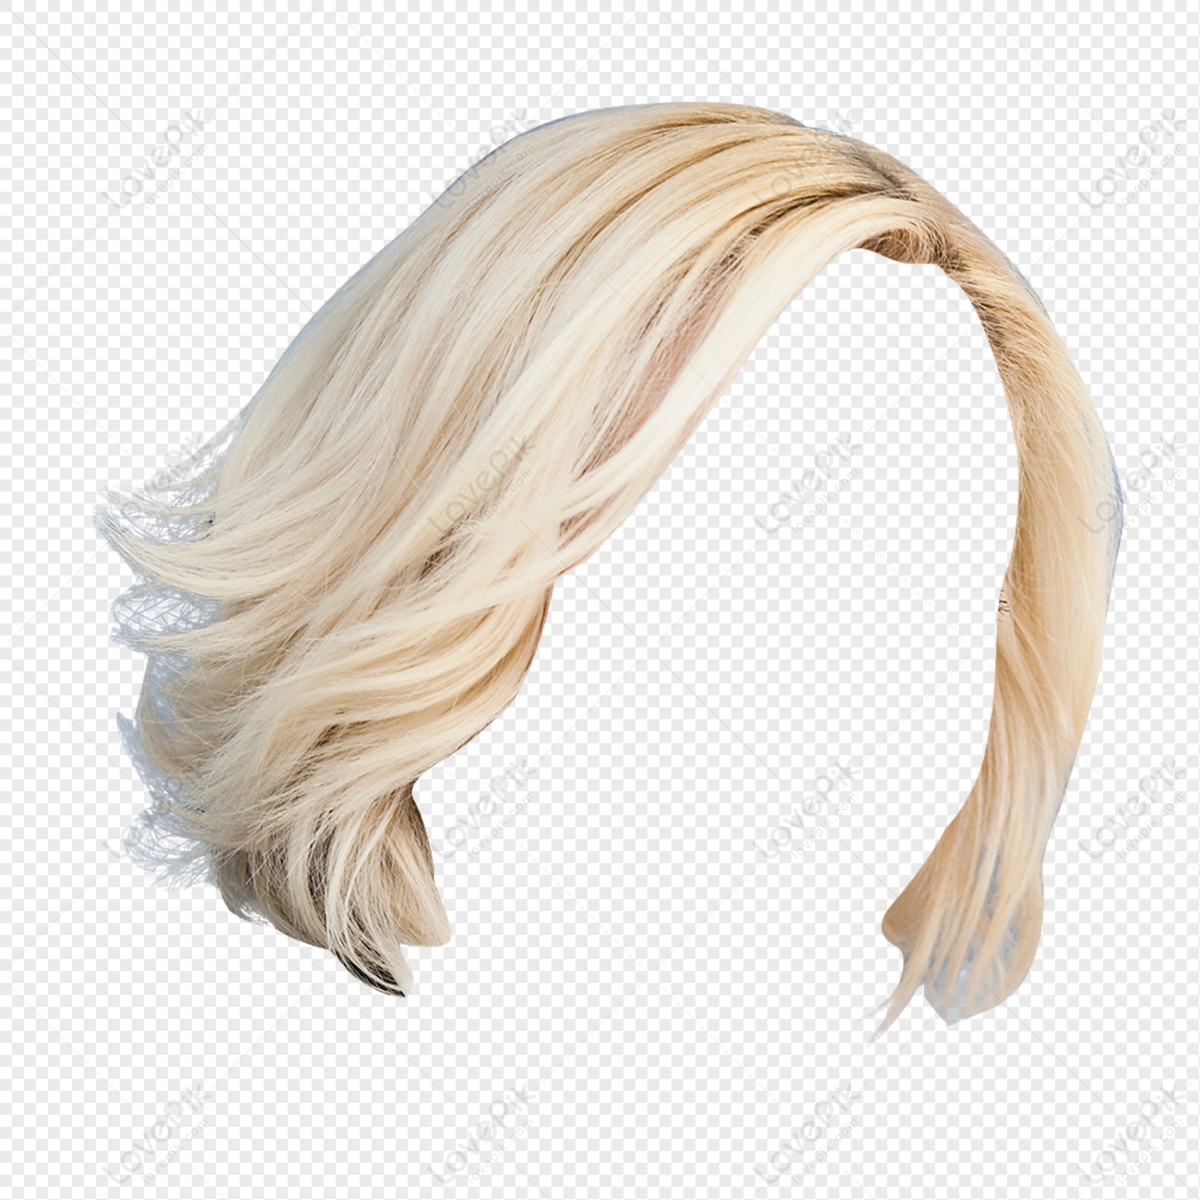 Blond Hair Images, HD Pictures For Free Vectors Download 